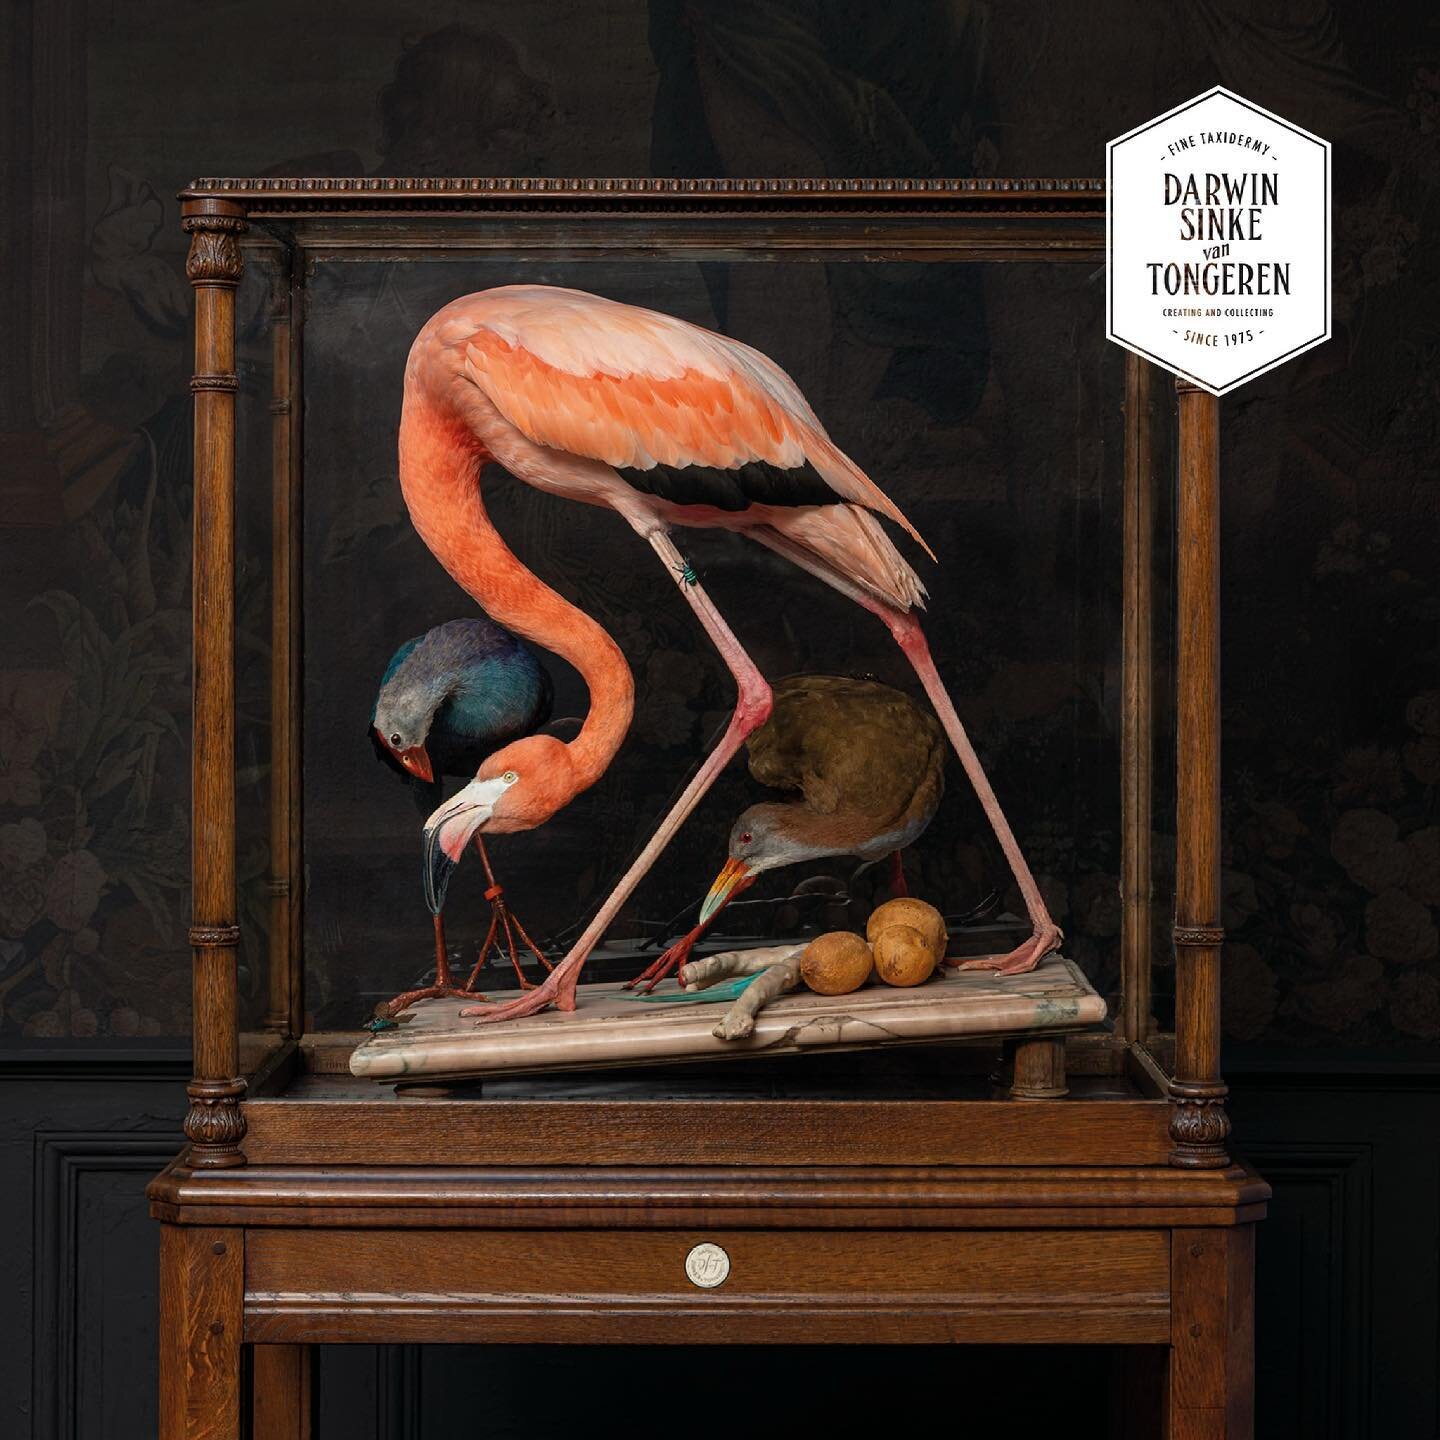 We are very proud of our contribution to the Audubon exhibition at the Teylers Museum. It is our hommage to the famous flamingo drawing by Audubon for the Birds of America book (This happens to be the most expensive book in the world!) This work is a